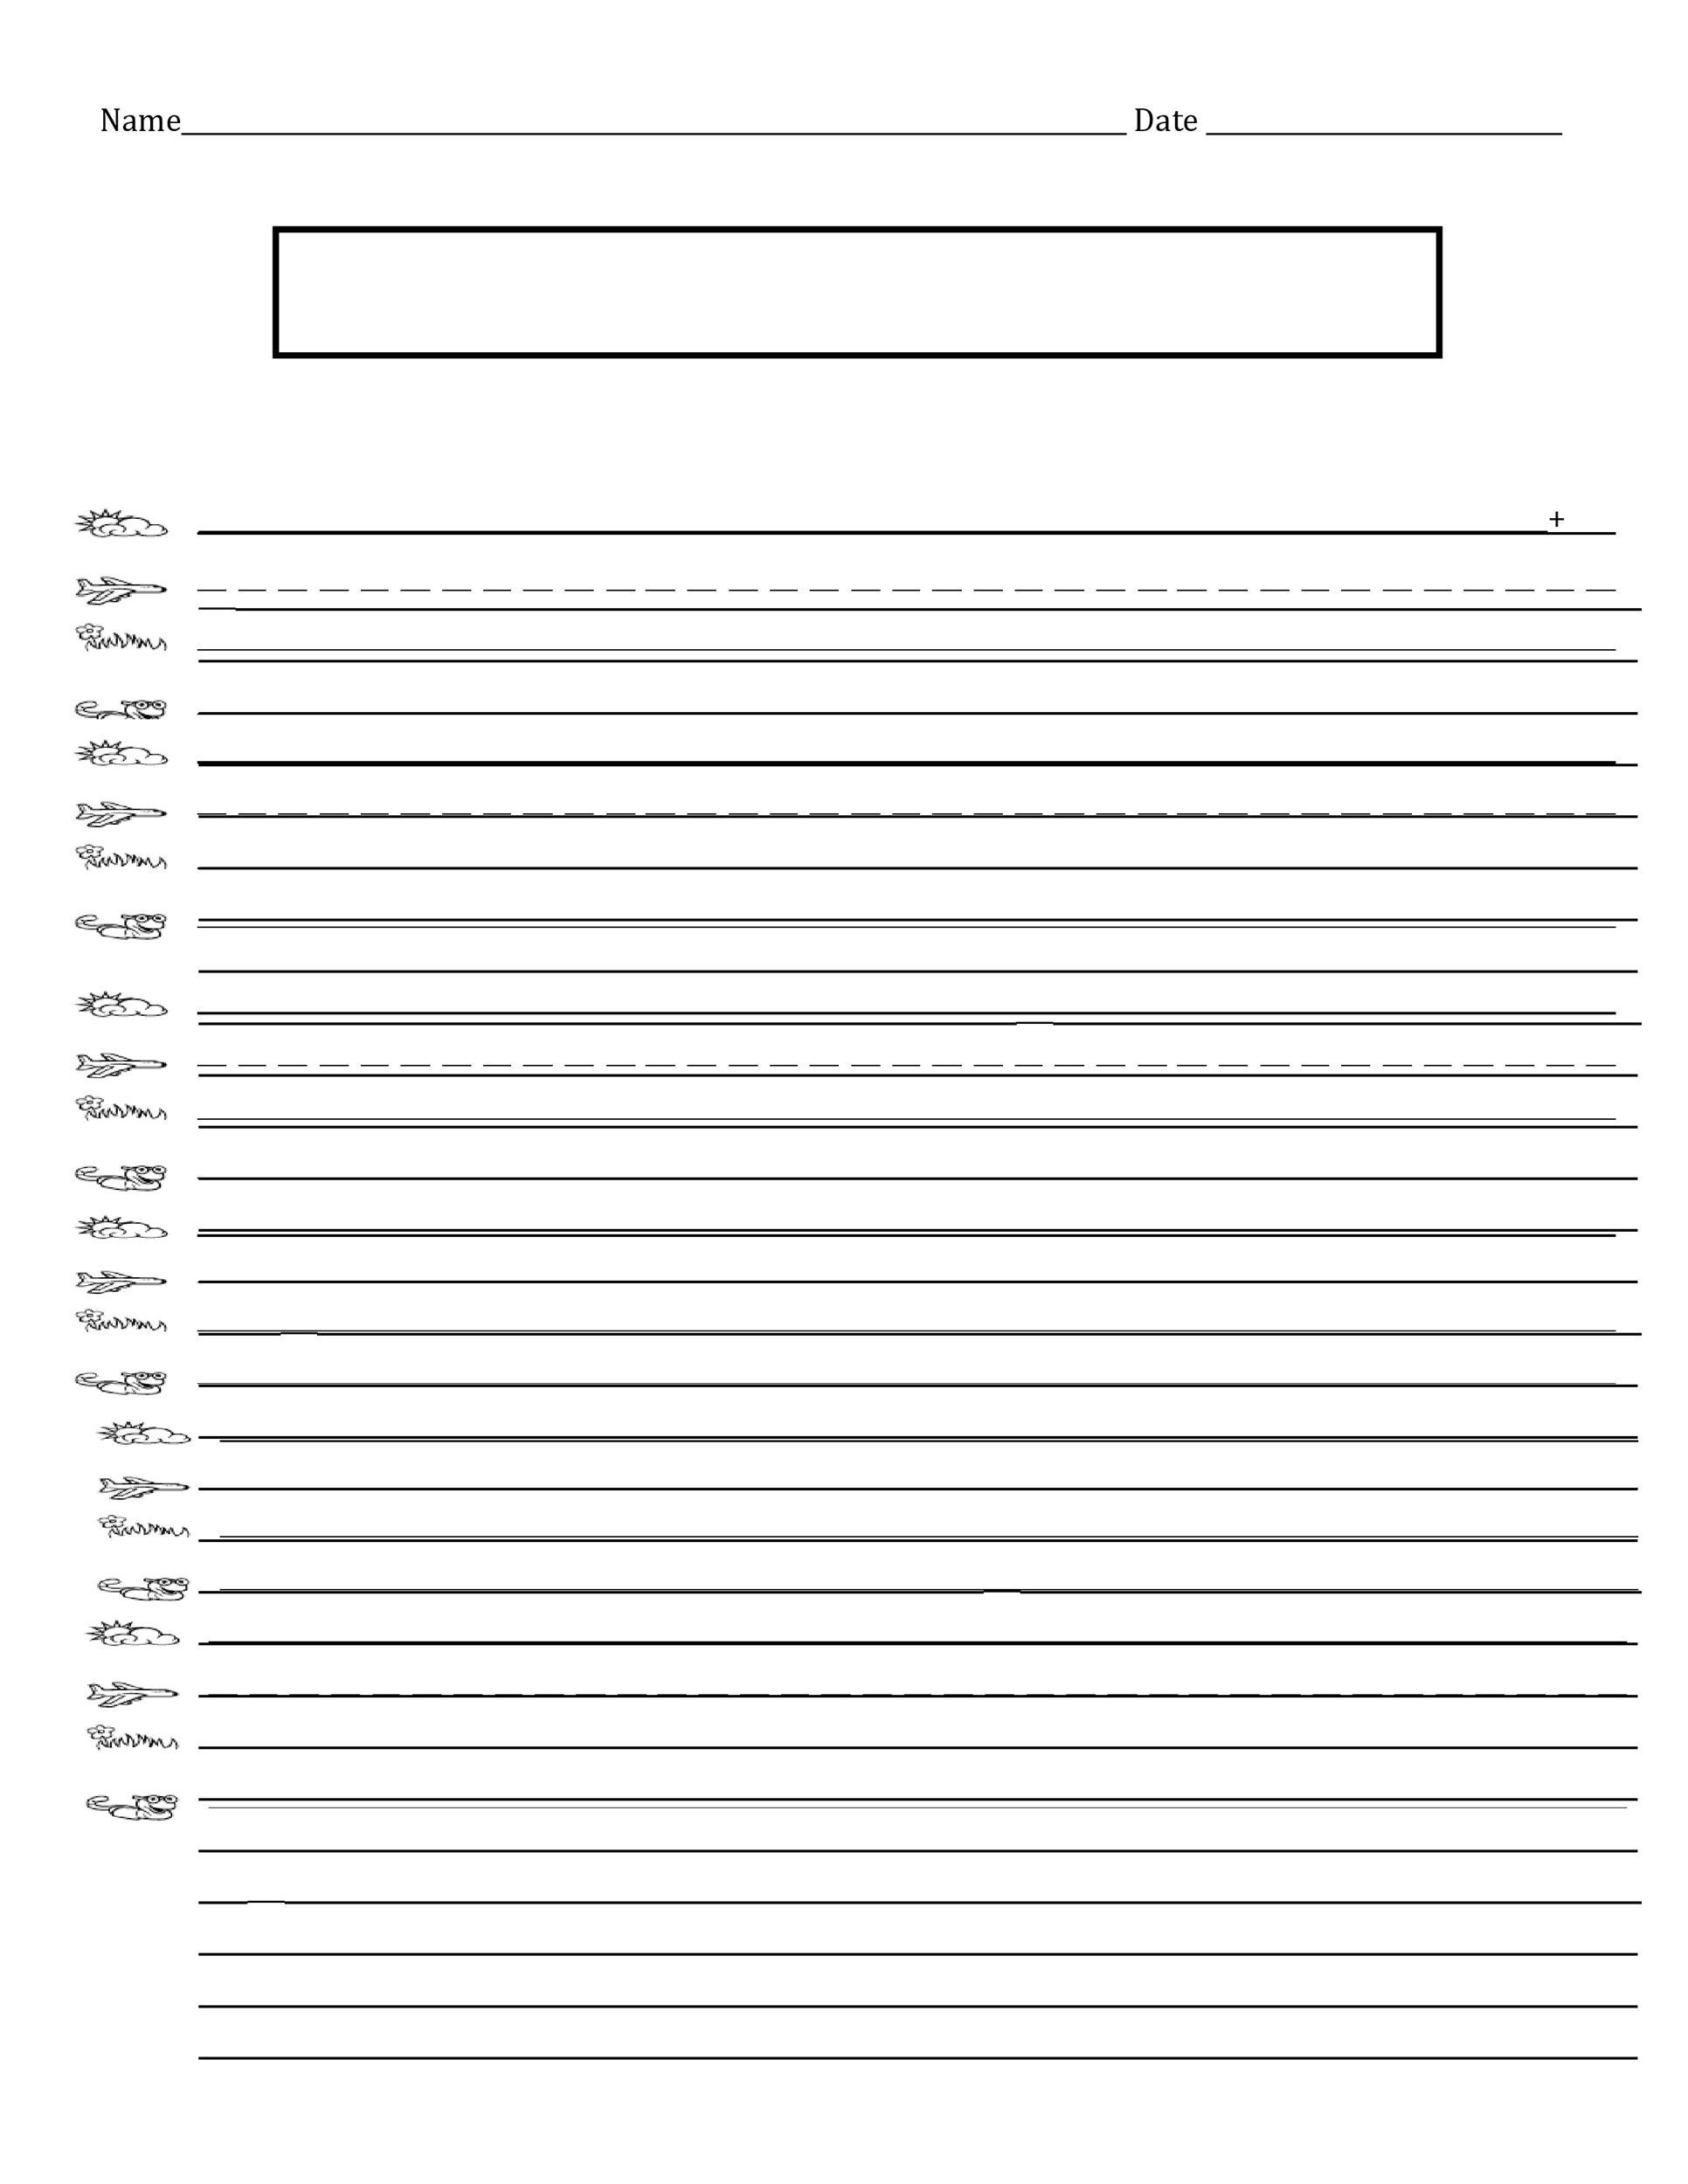 gallery-of-free-lined-paper-rome-fontanacountryinn-com-template-for